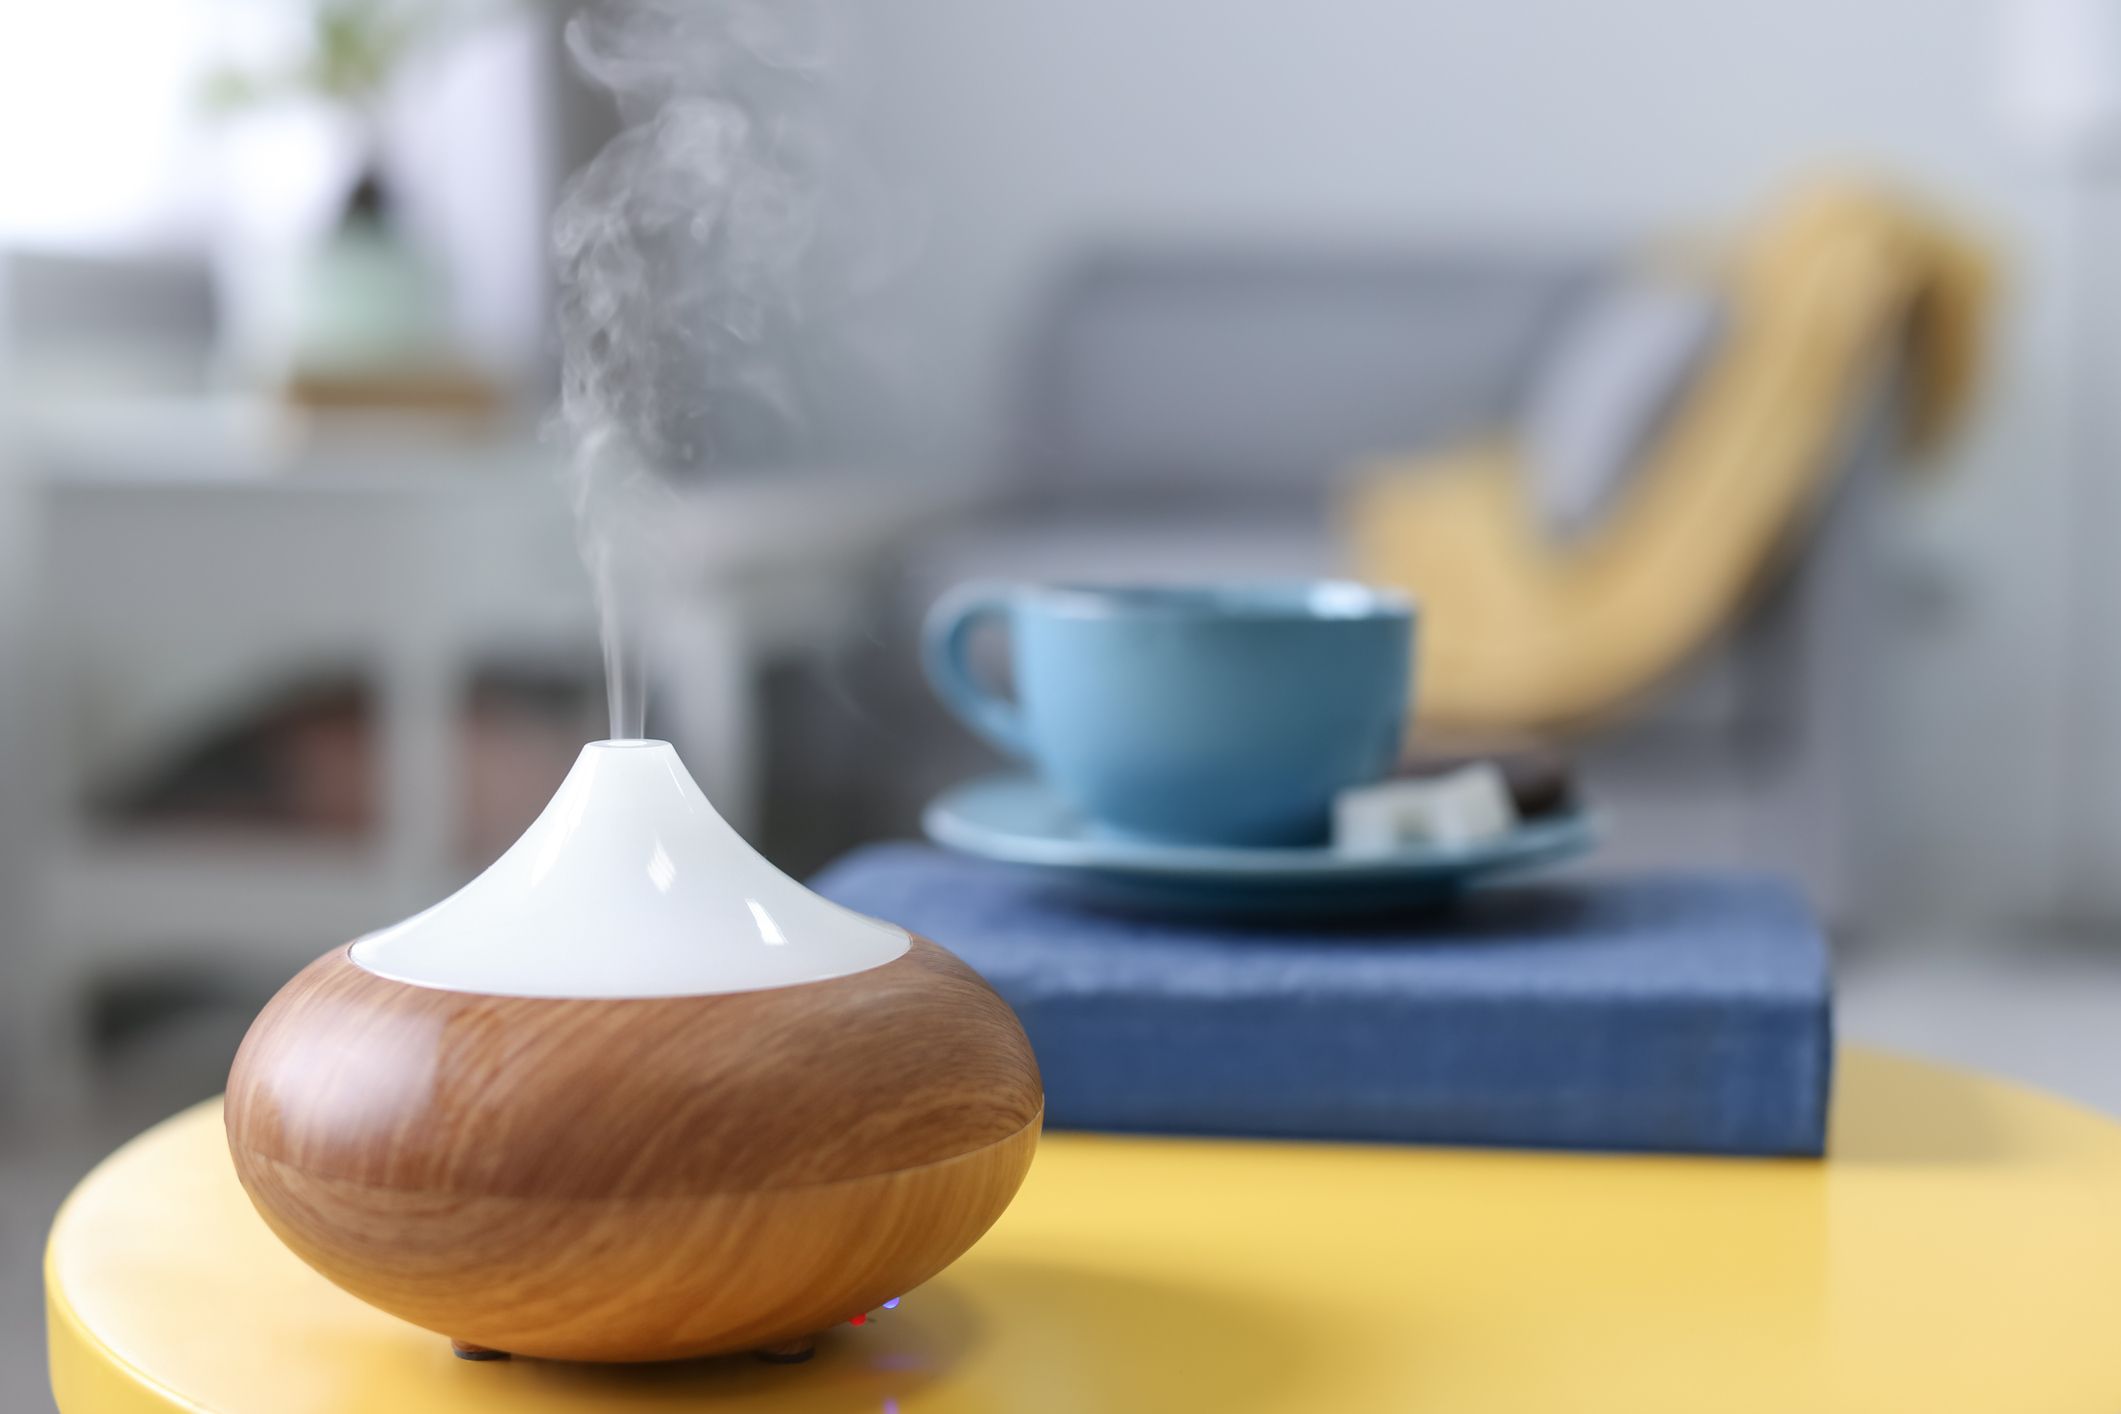 [Image: how-to-clean-humidifier-1575588051.jpg?c...u003d640:*]